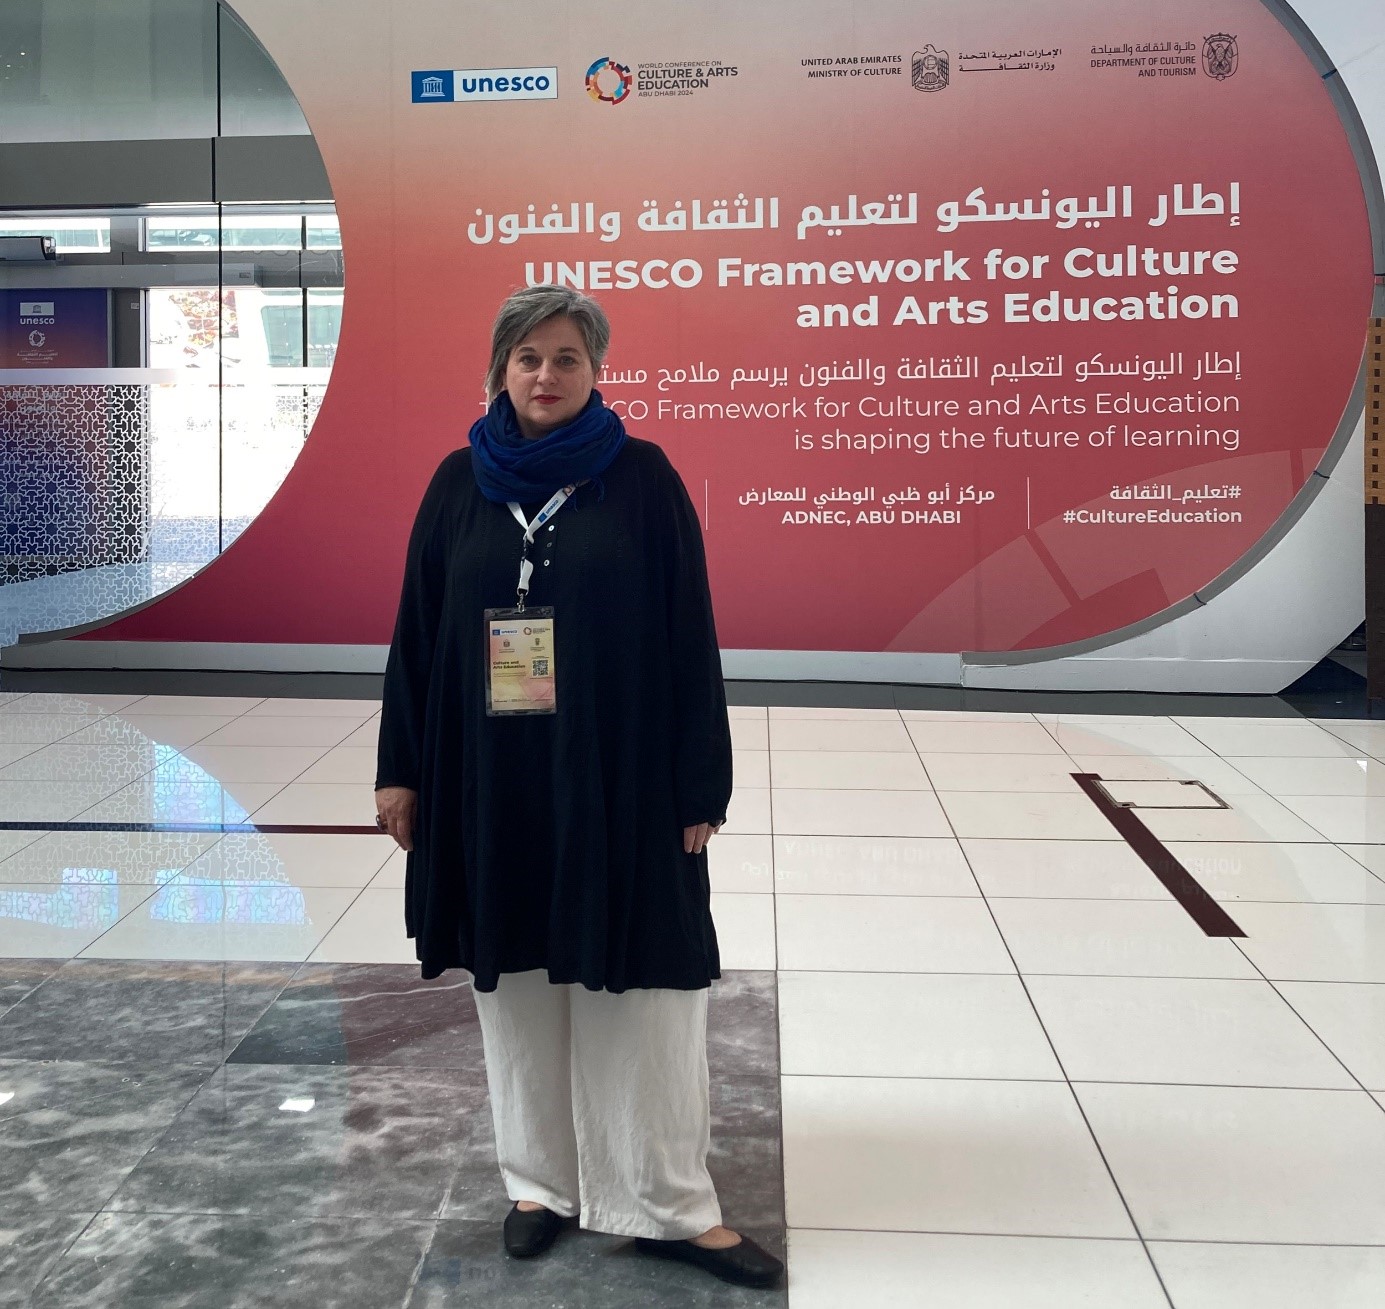 Lecturer of the Design Campus of SZE gave a presentation at the UNESCO World Conference